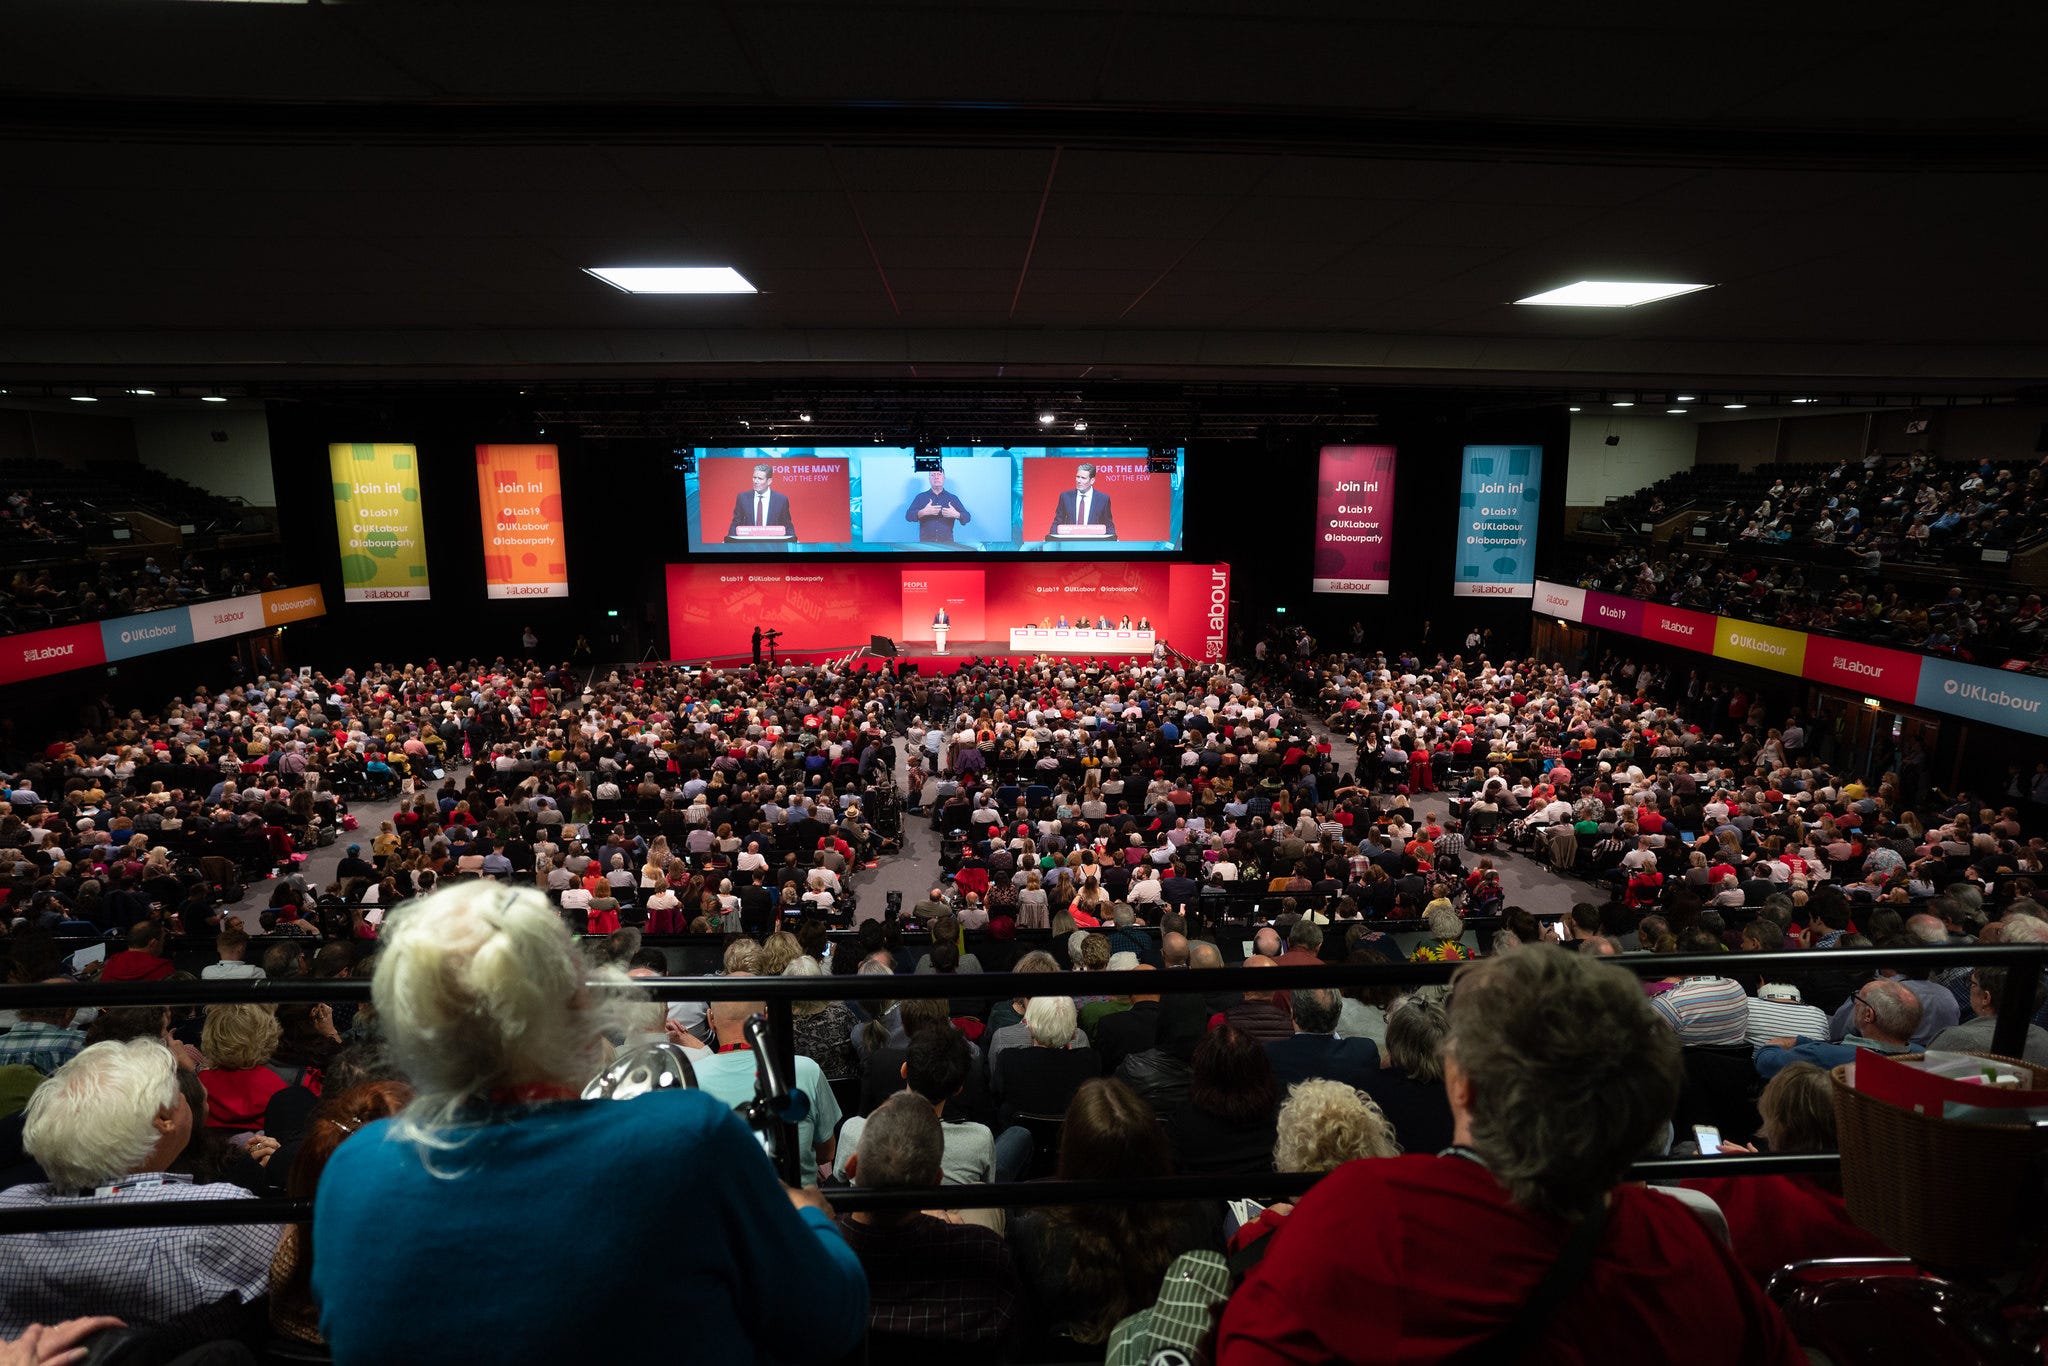 Head-on shot of Labour Party conference hall, Brighton 2019, showing rows of seated delegates, stage and big screen